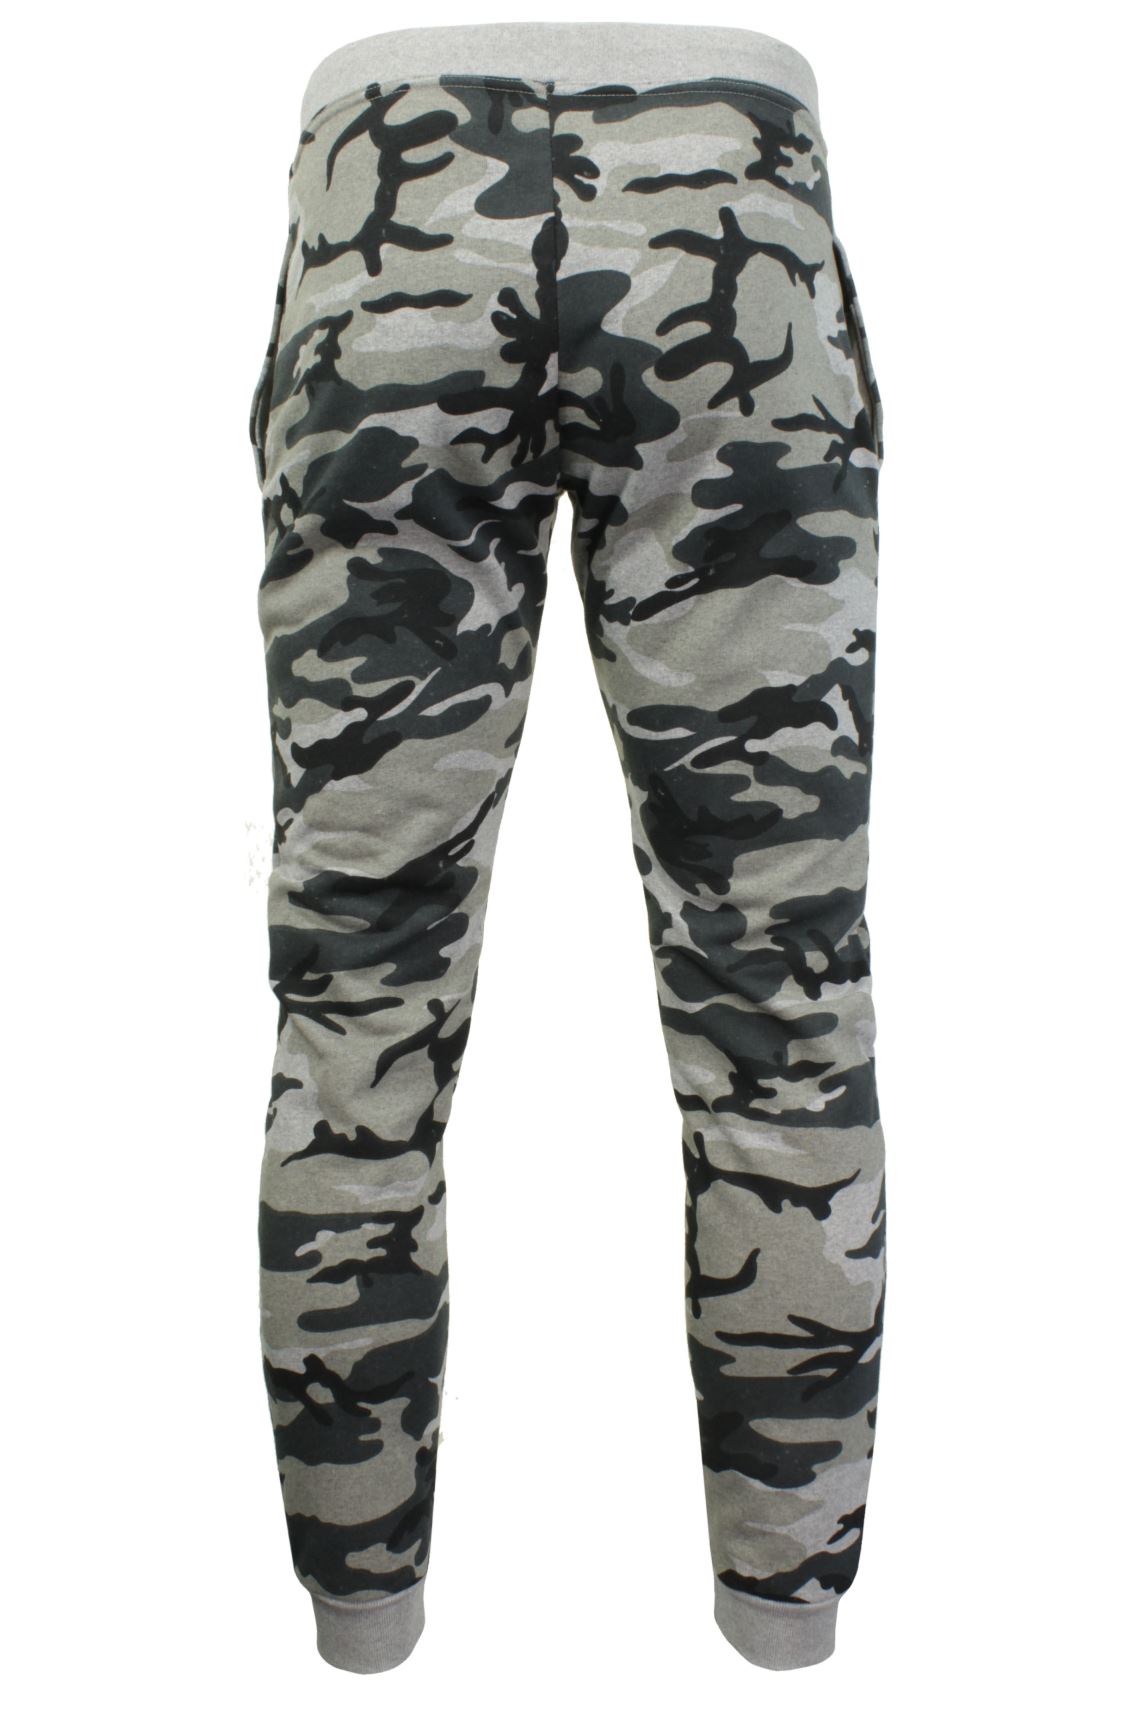 Mens Camouflage Print Joggers/ Gym Running Pants - Skinny Fit - by Xact, 03, Xjg-0002_Camo, Grey